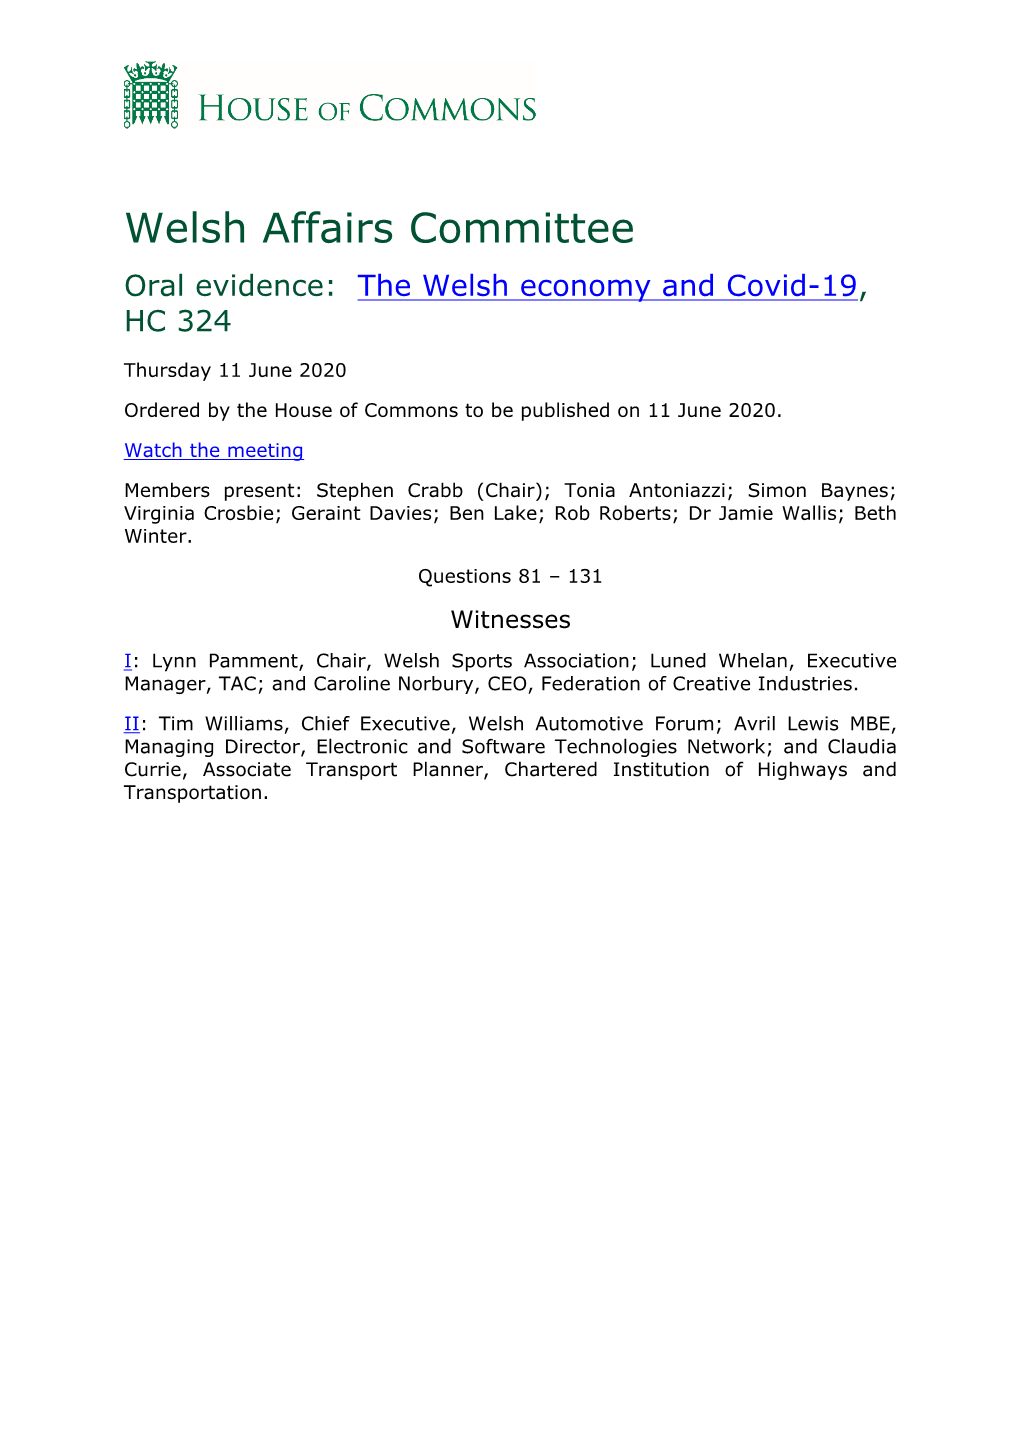 Welsh Affairs Committee Oral Evidence: the Welsh Economy and Covid-19, HC 324